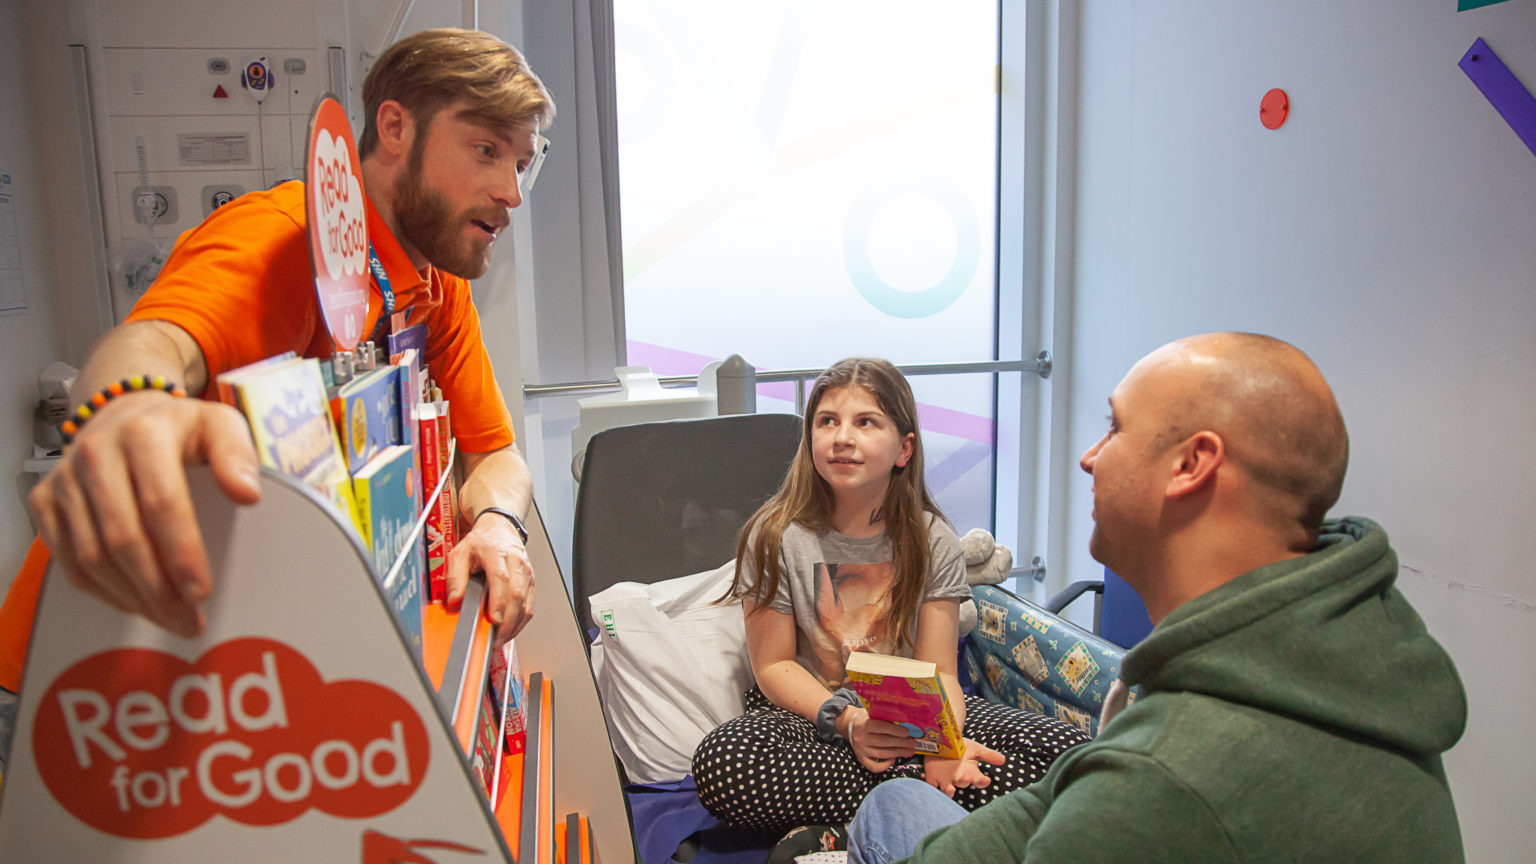 Bringing The Magic Of Stories To Seriously Ill Children In Hospital